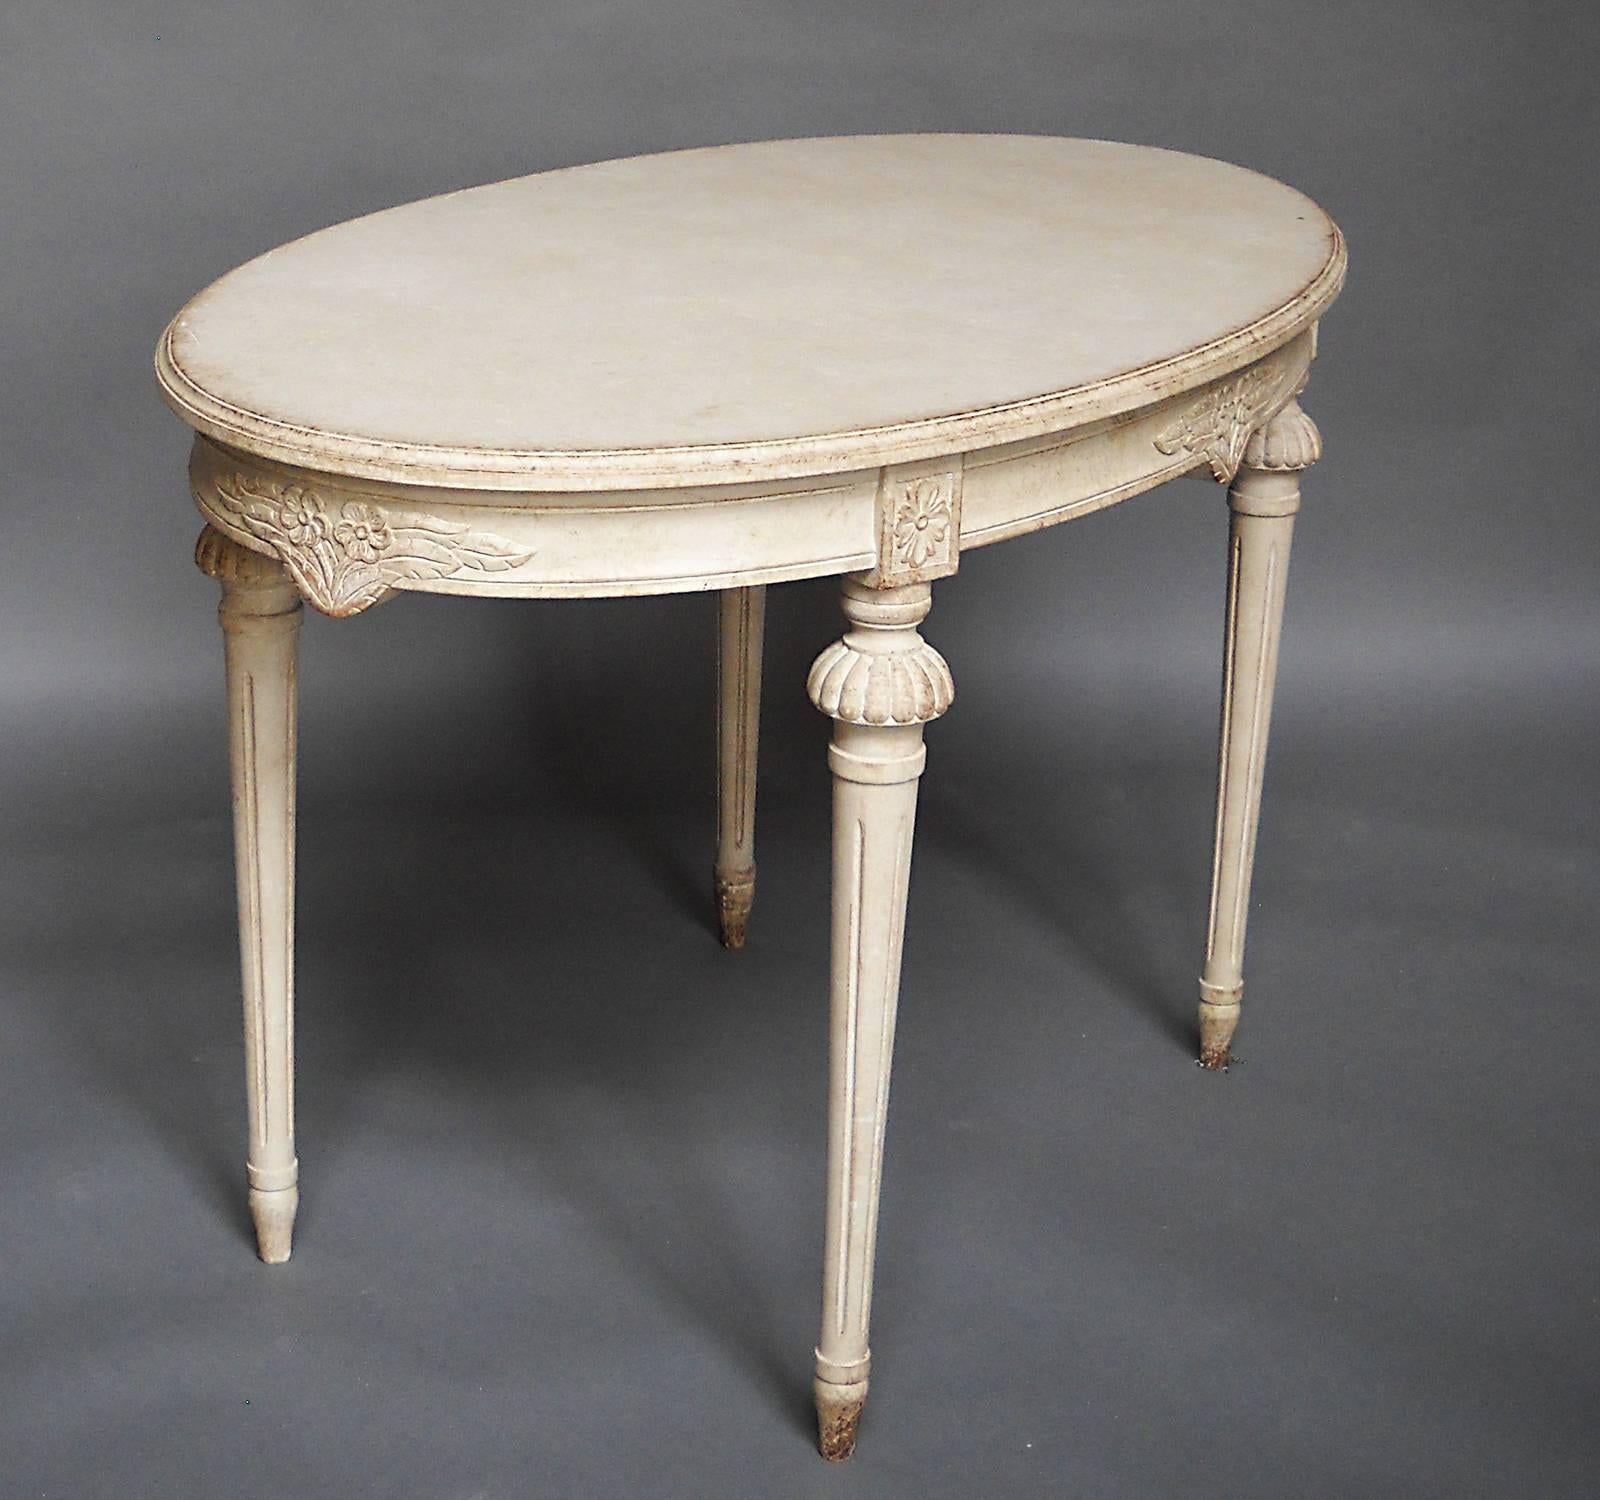 Lovely oval table, Sweden, circa 1910, in the Gustavian style. The apron is carved with bunches of spring flowers, with a rosette at the top of each leg. The legs themselves are round and tapering with carved elements at the tops.